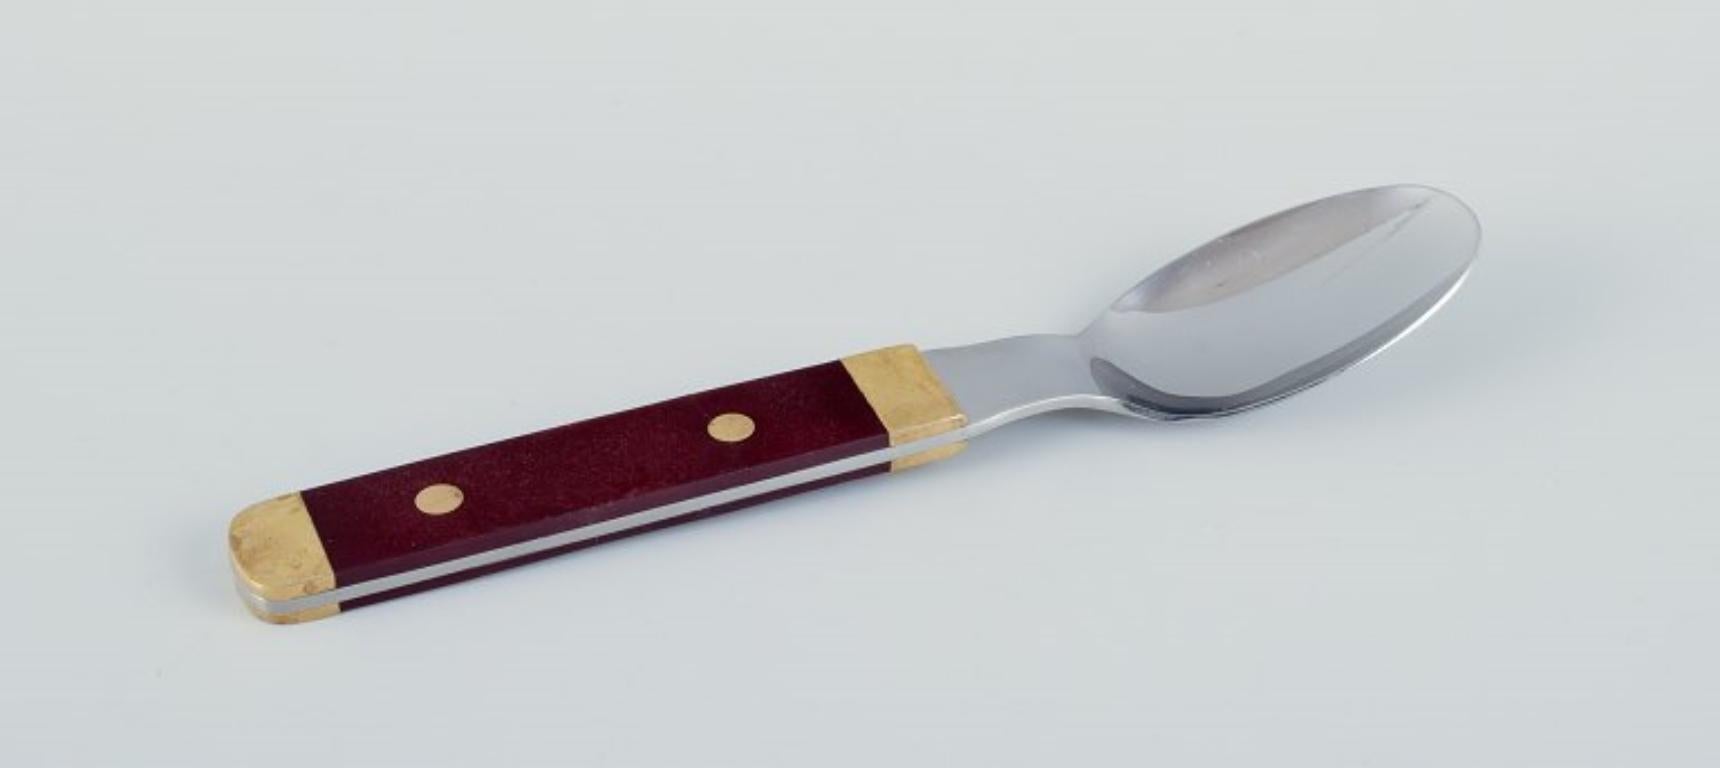 GAB-Gense, a complete set of dinner cutlery for four people. Retro style.
From the 1970s.
Made of brass, plastic, and stainless steel.
In good condition, with some minor cracks in the plastic.
Marked.
Knife: Length 21.3 cm.
Fork: Length 19.0